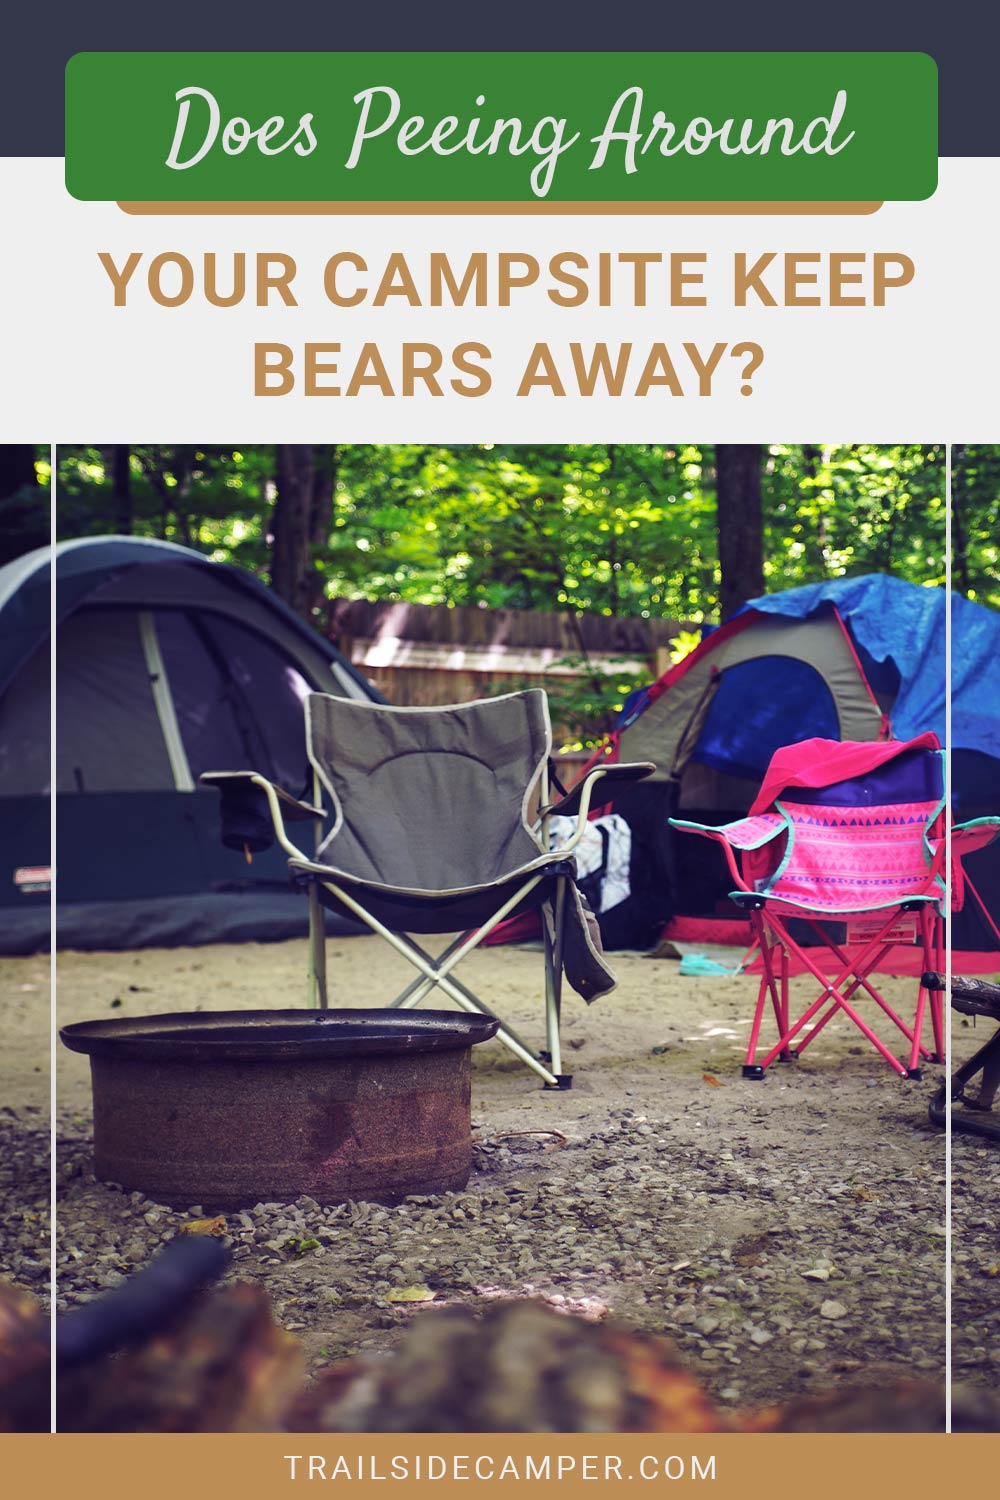 Does Peeing Around Your Campsite Keep Bears Away?